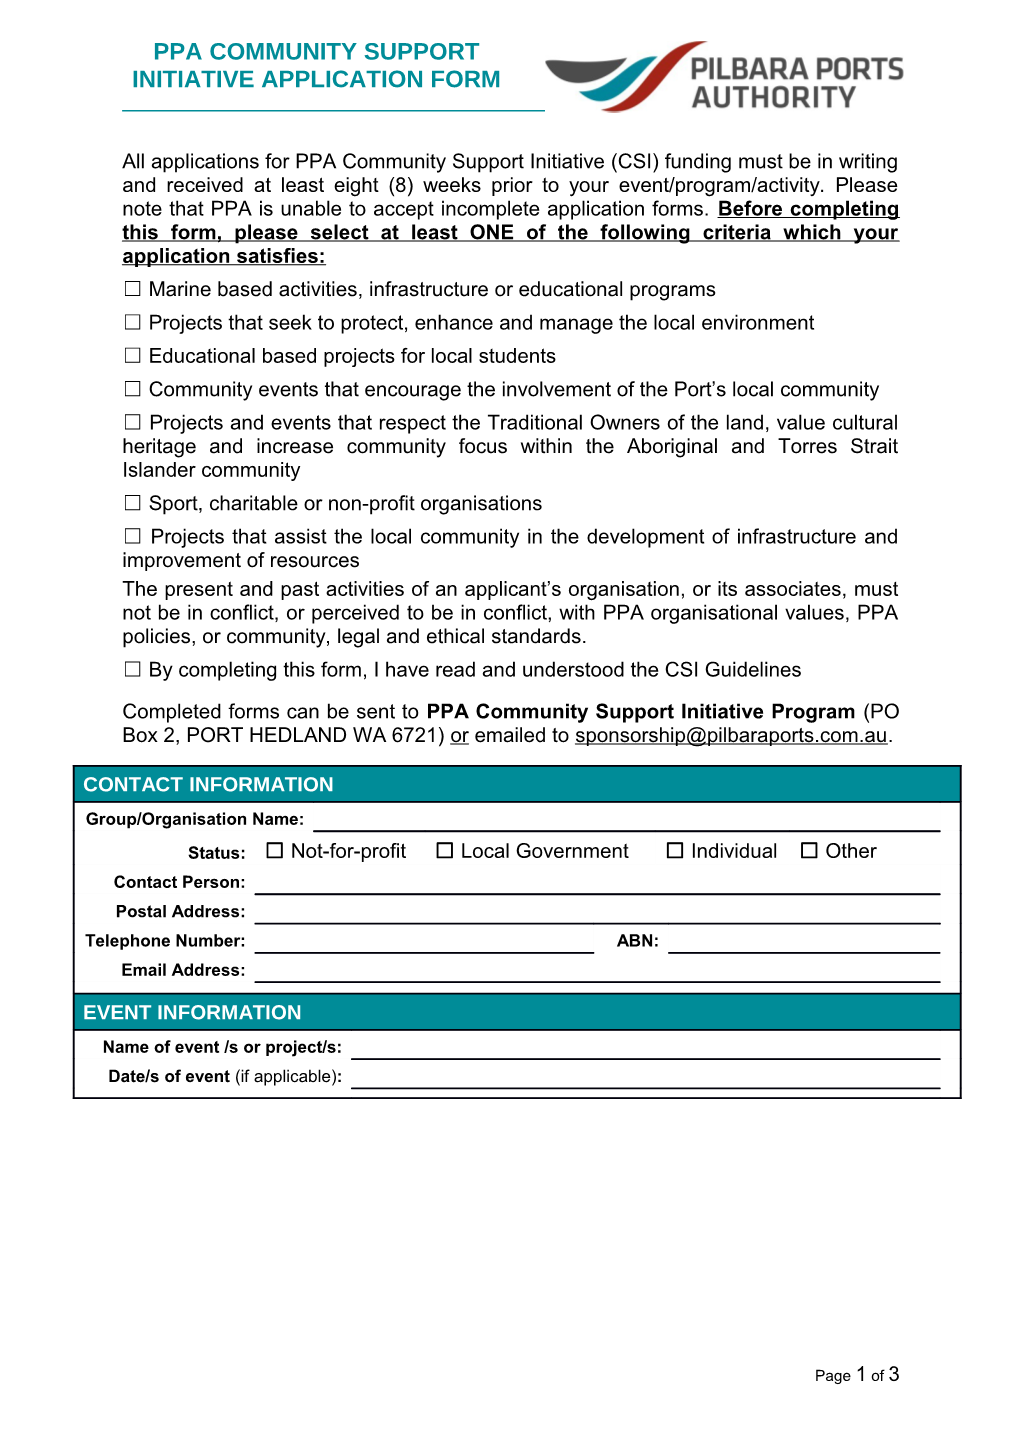 PPA Community Support Initiative Application Form